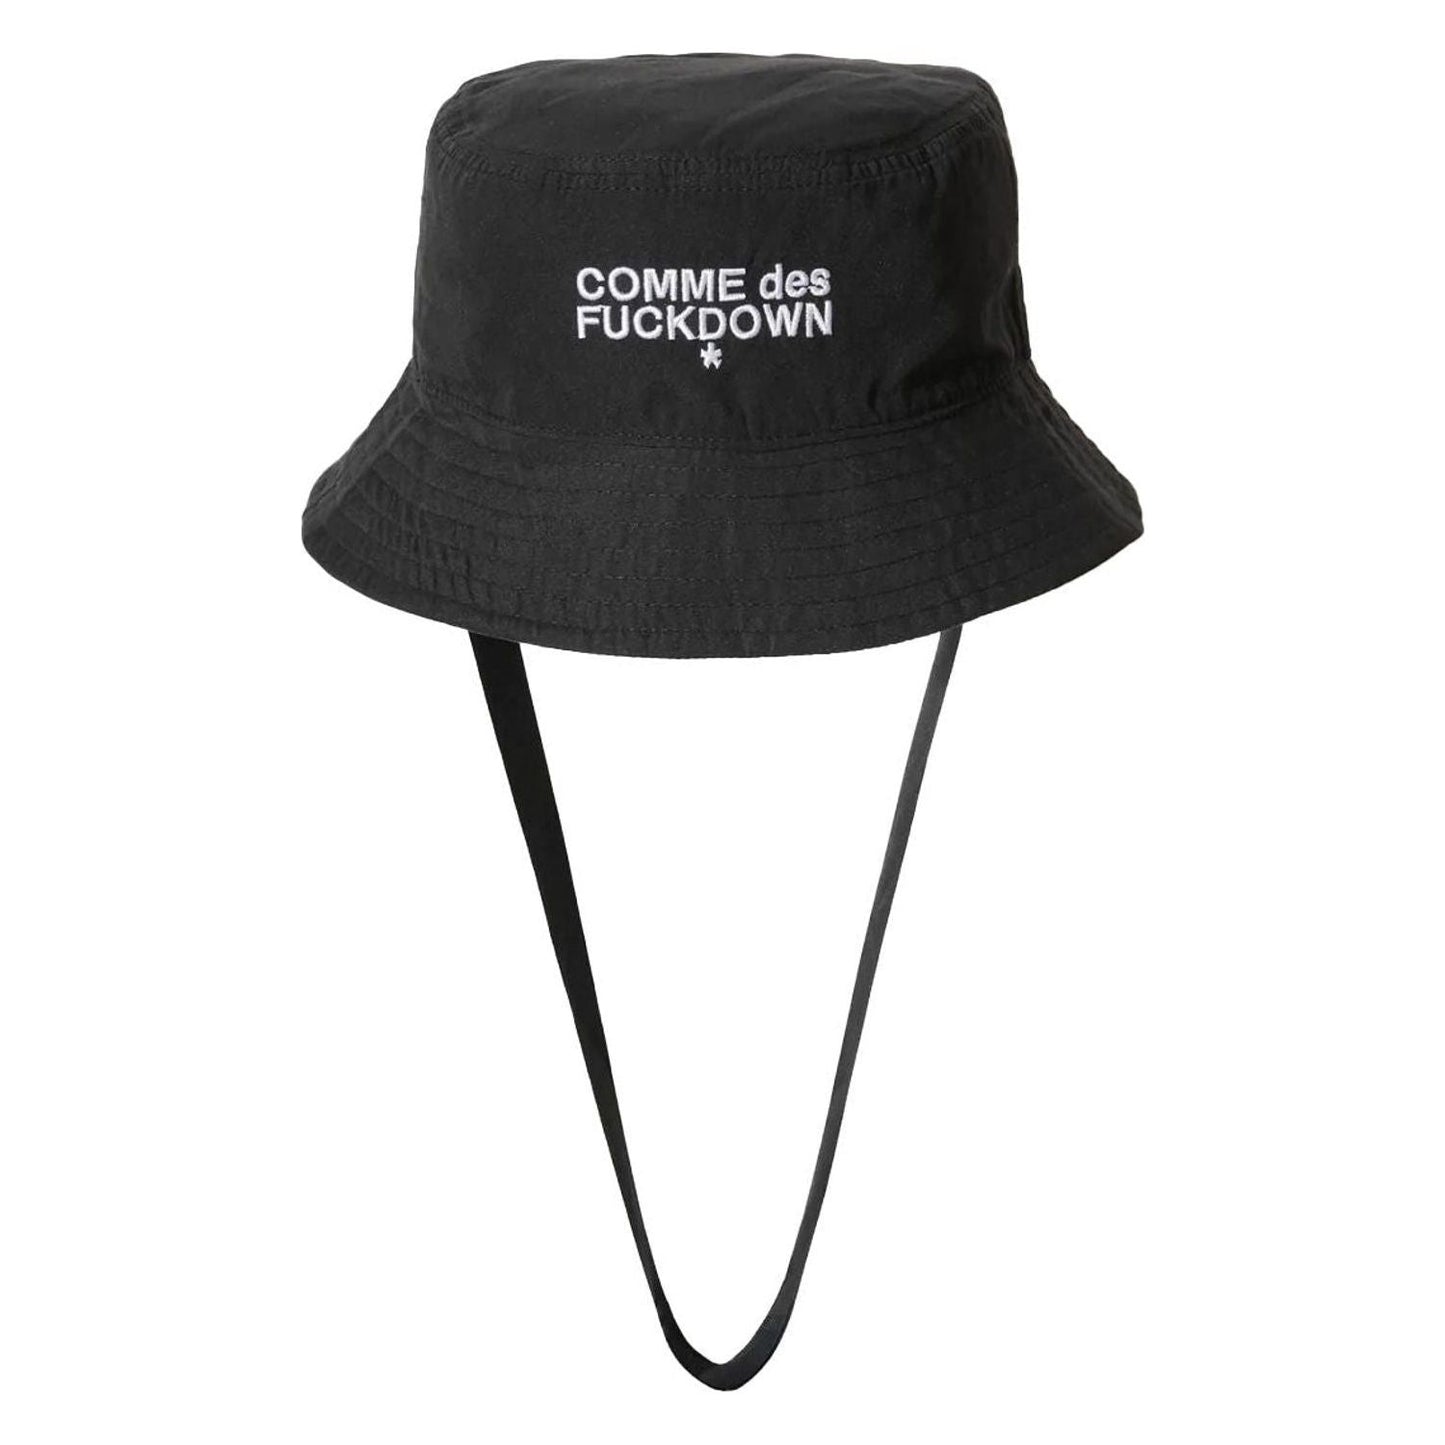 Comme Des Fuckdown Sleek Nylon Fisherman Hat with Iconic Stitched Logo black-polyester-hats-cap product-8449-70830211-03c770cd-32d.jpg